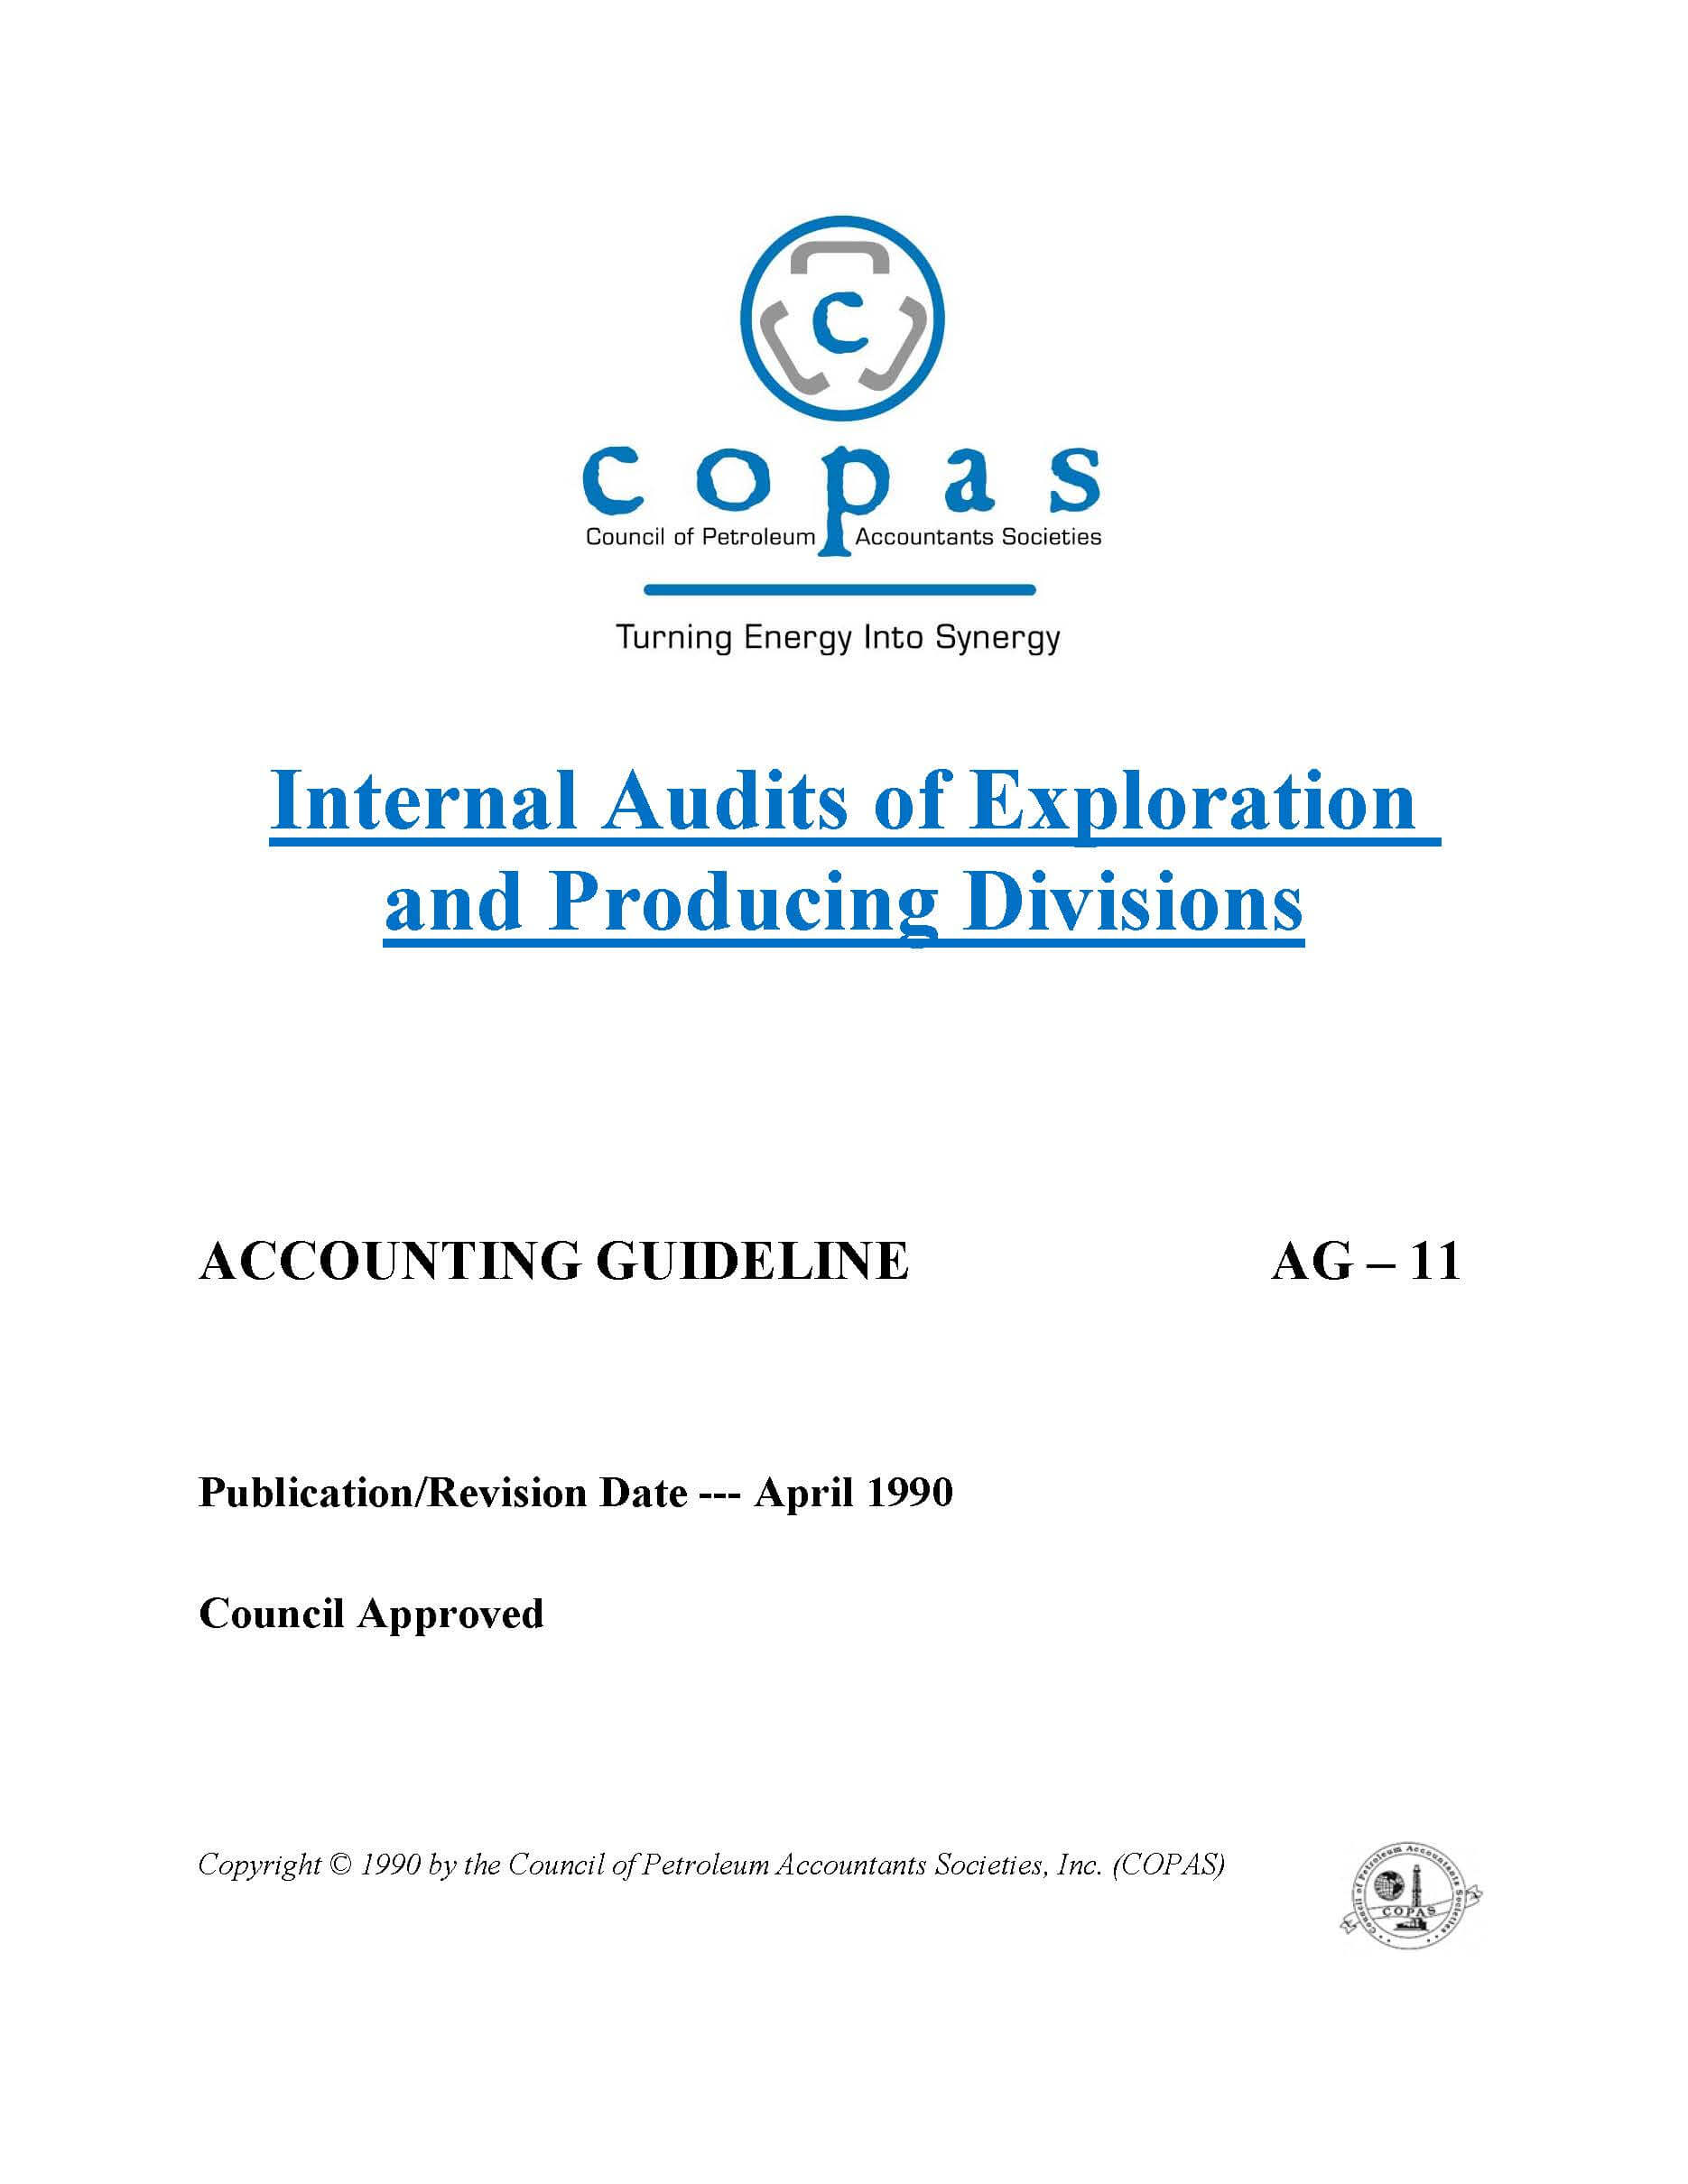 AG-11 Internal Audits of Exploration and Producing Divisions - products AG - Council of Petroleum Accountants Societies